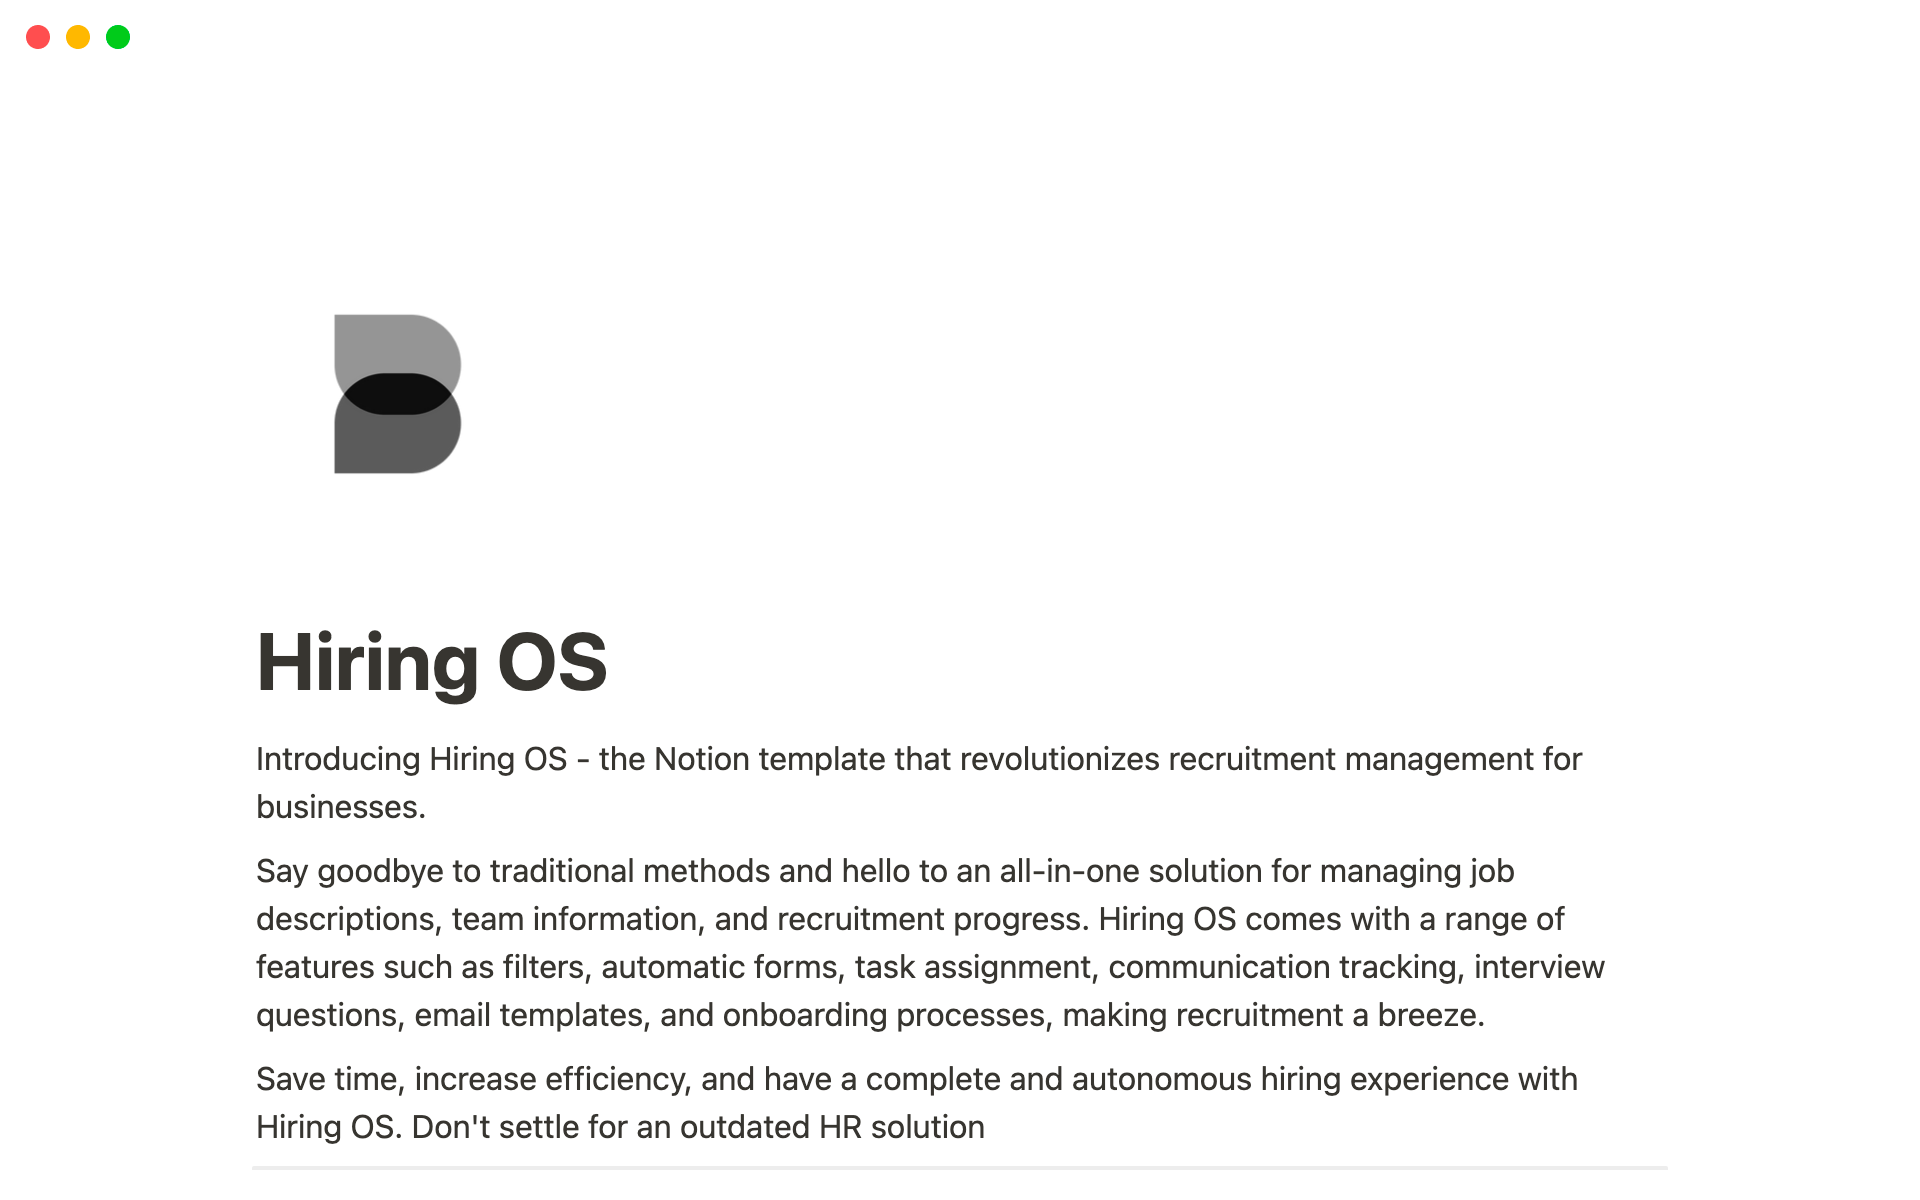 Hiring OS is the ultimate Notion template for businesses looking to streamline their recruitment process and ensure a complete and autonomous experience for both employers and candidates.